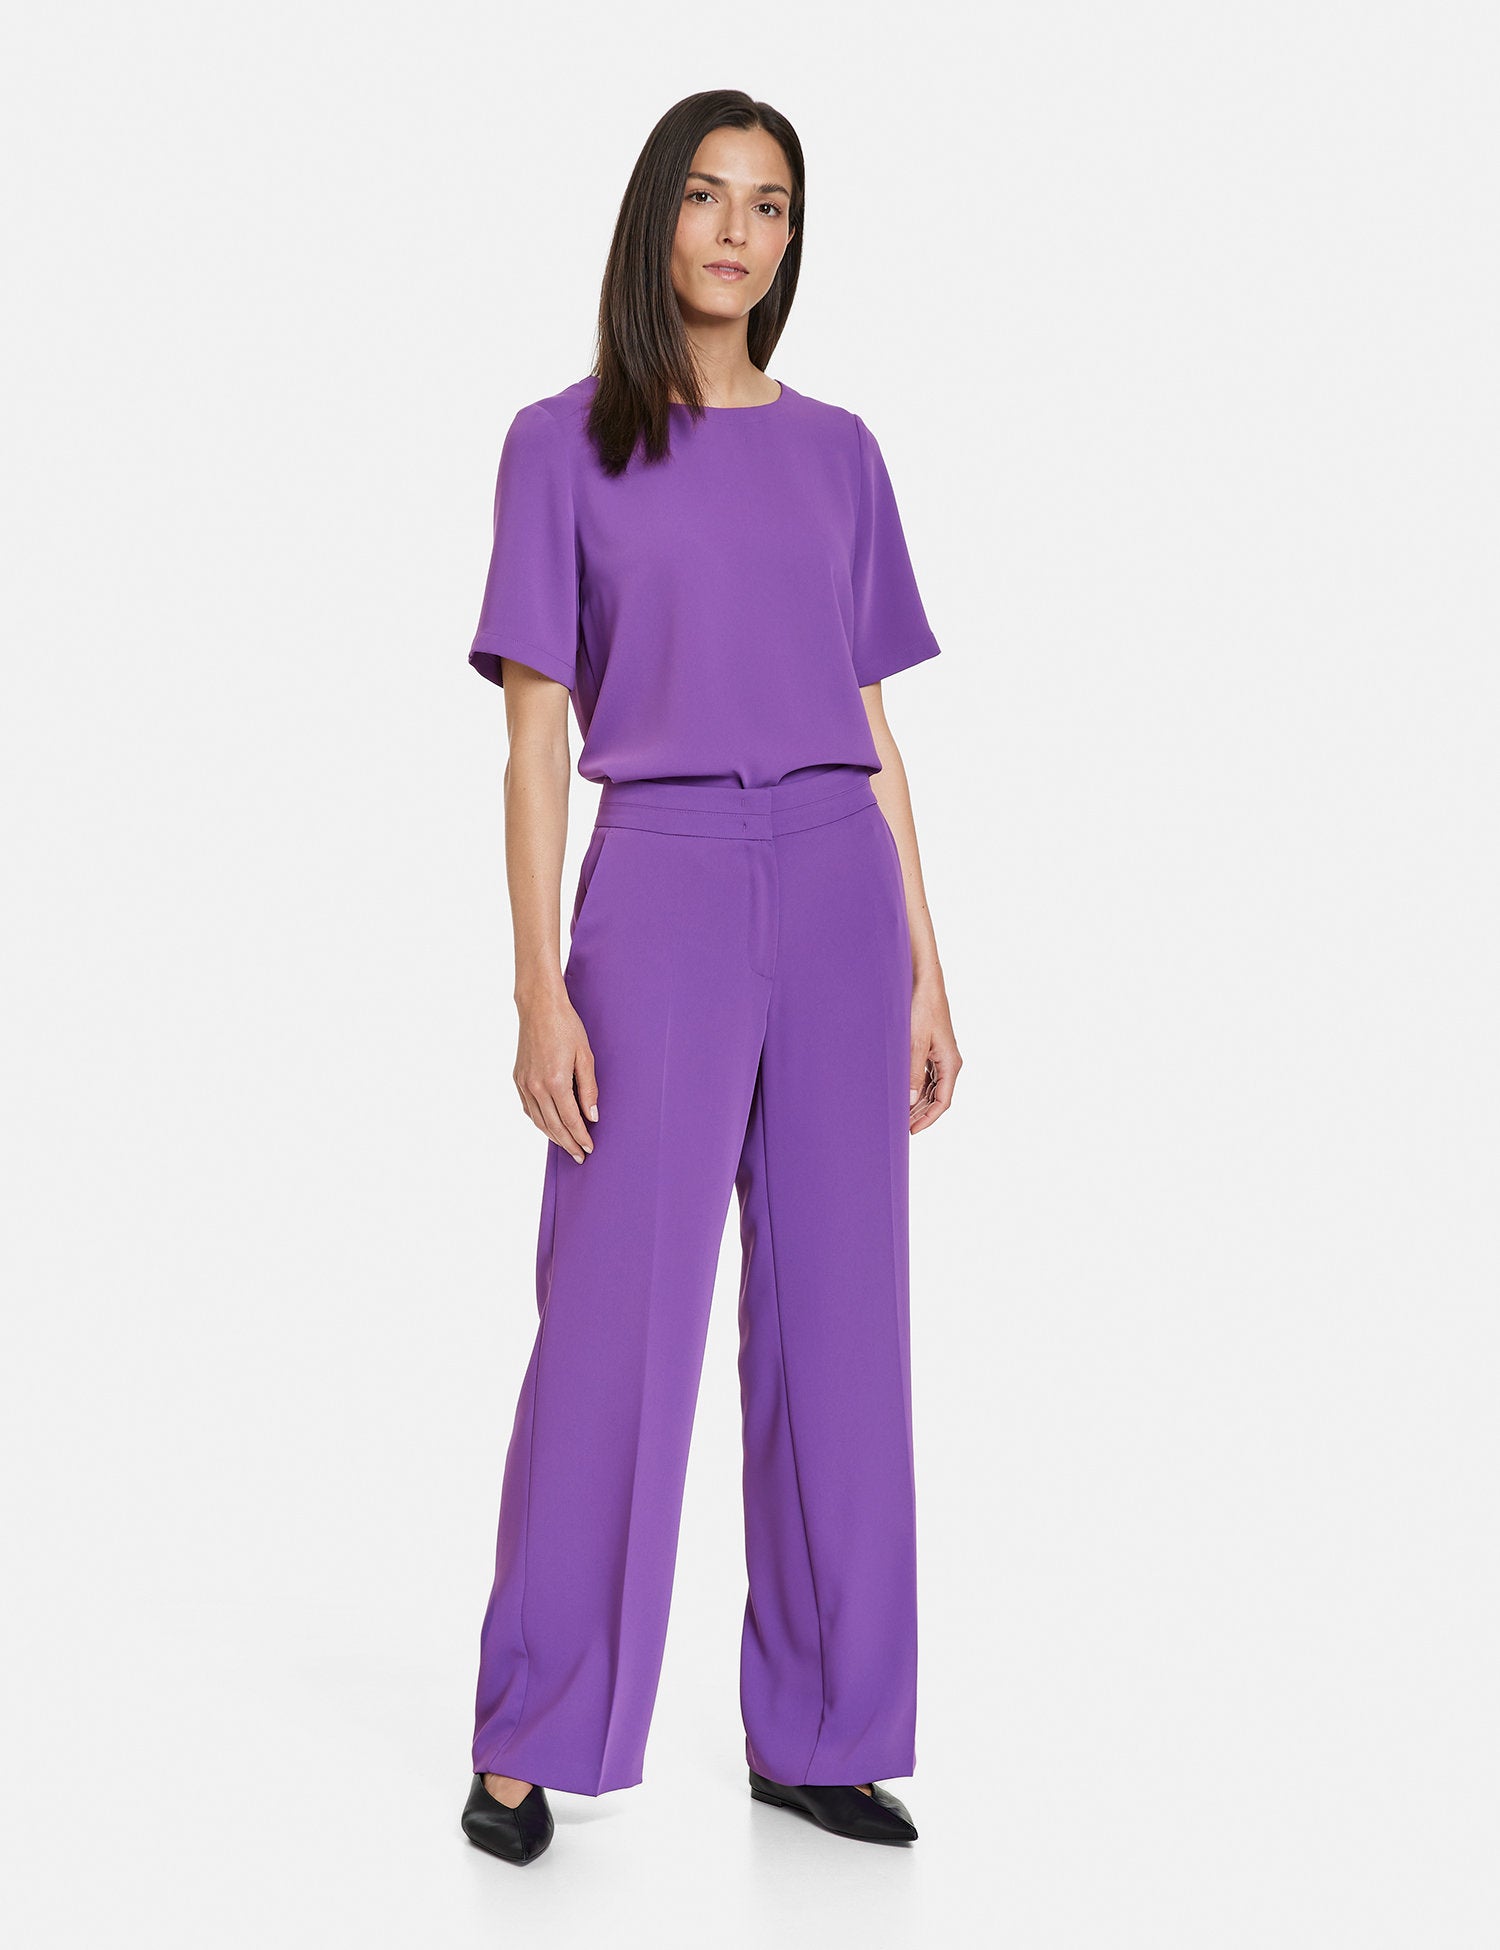 Flowing Trousers With Pressed Pleats_220002-31222_30904_03